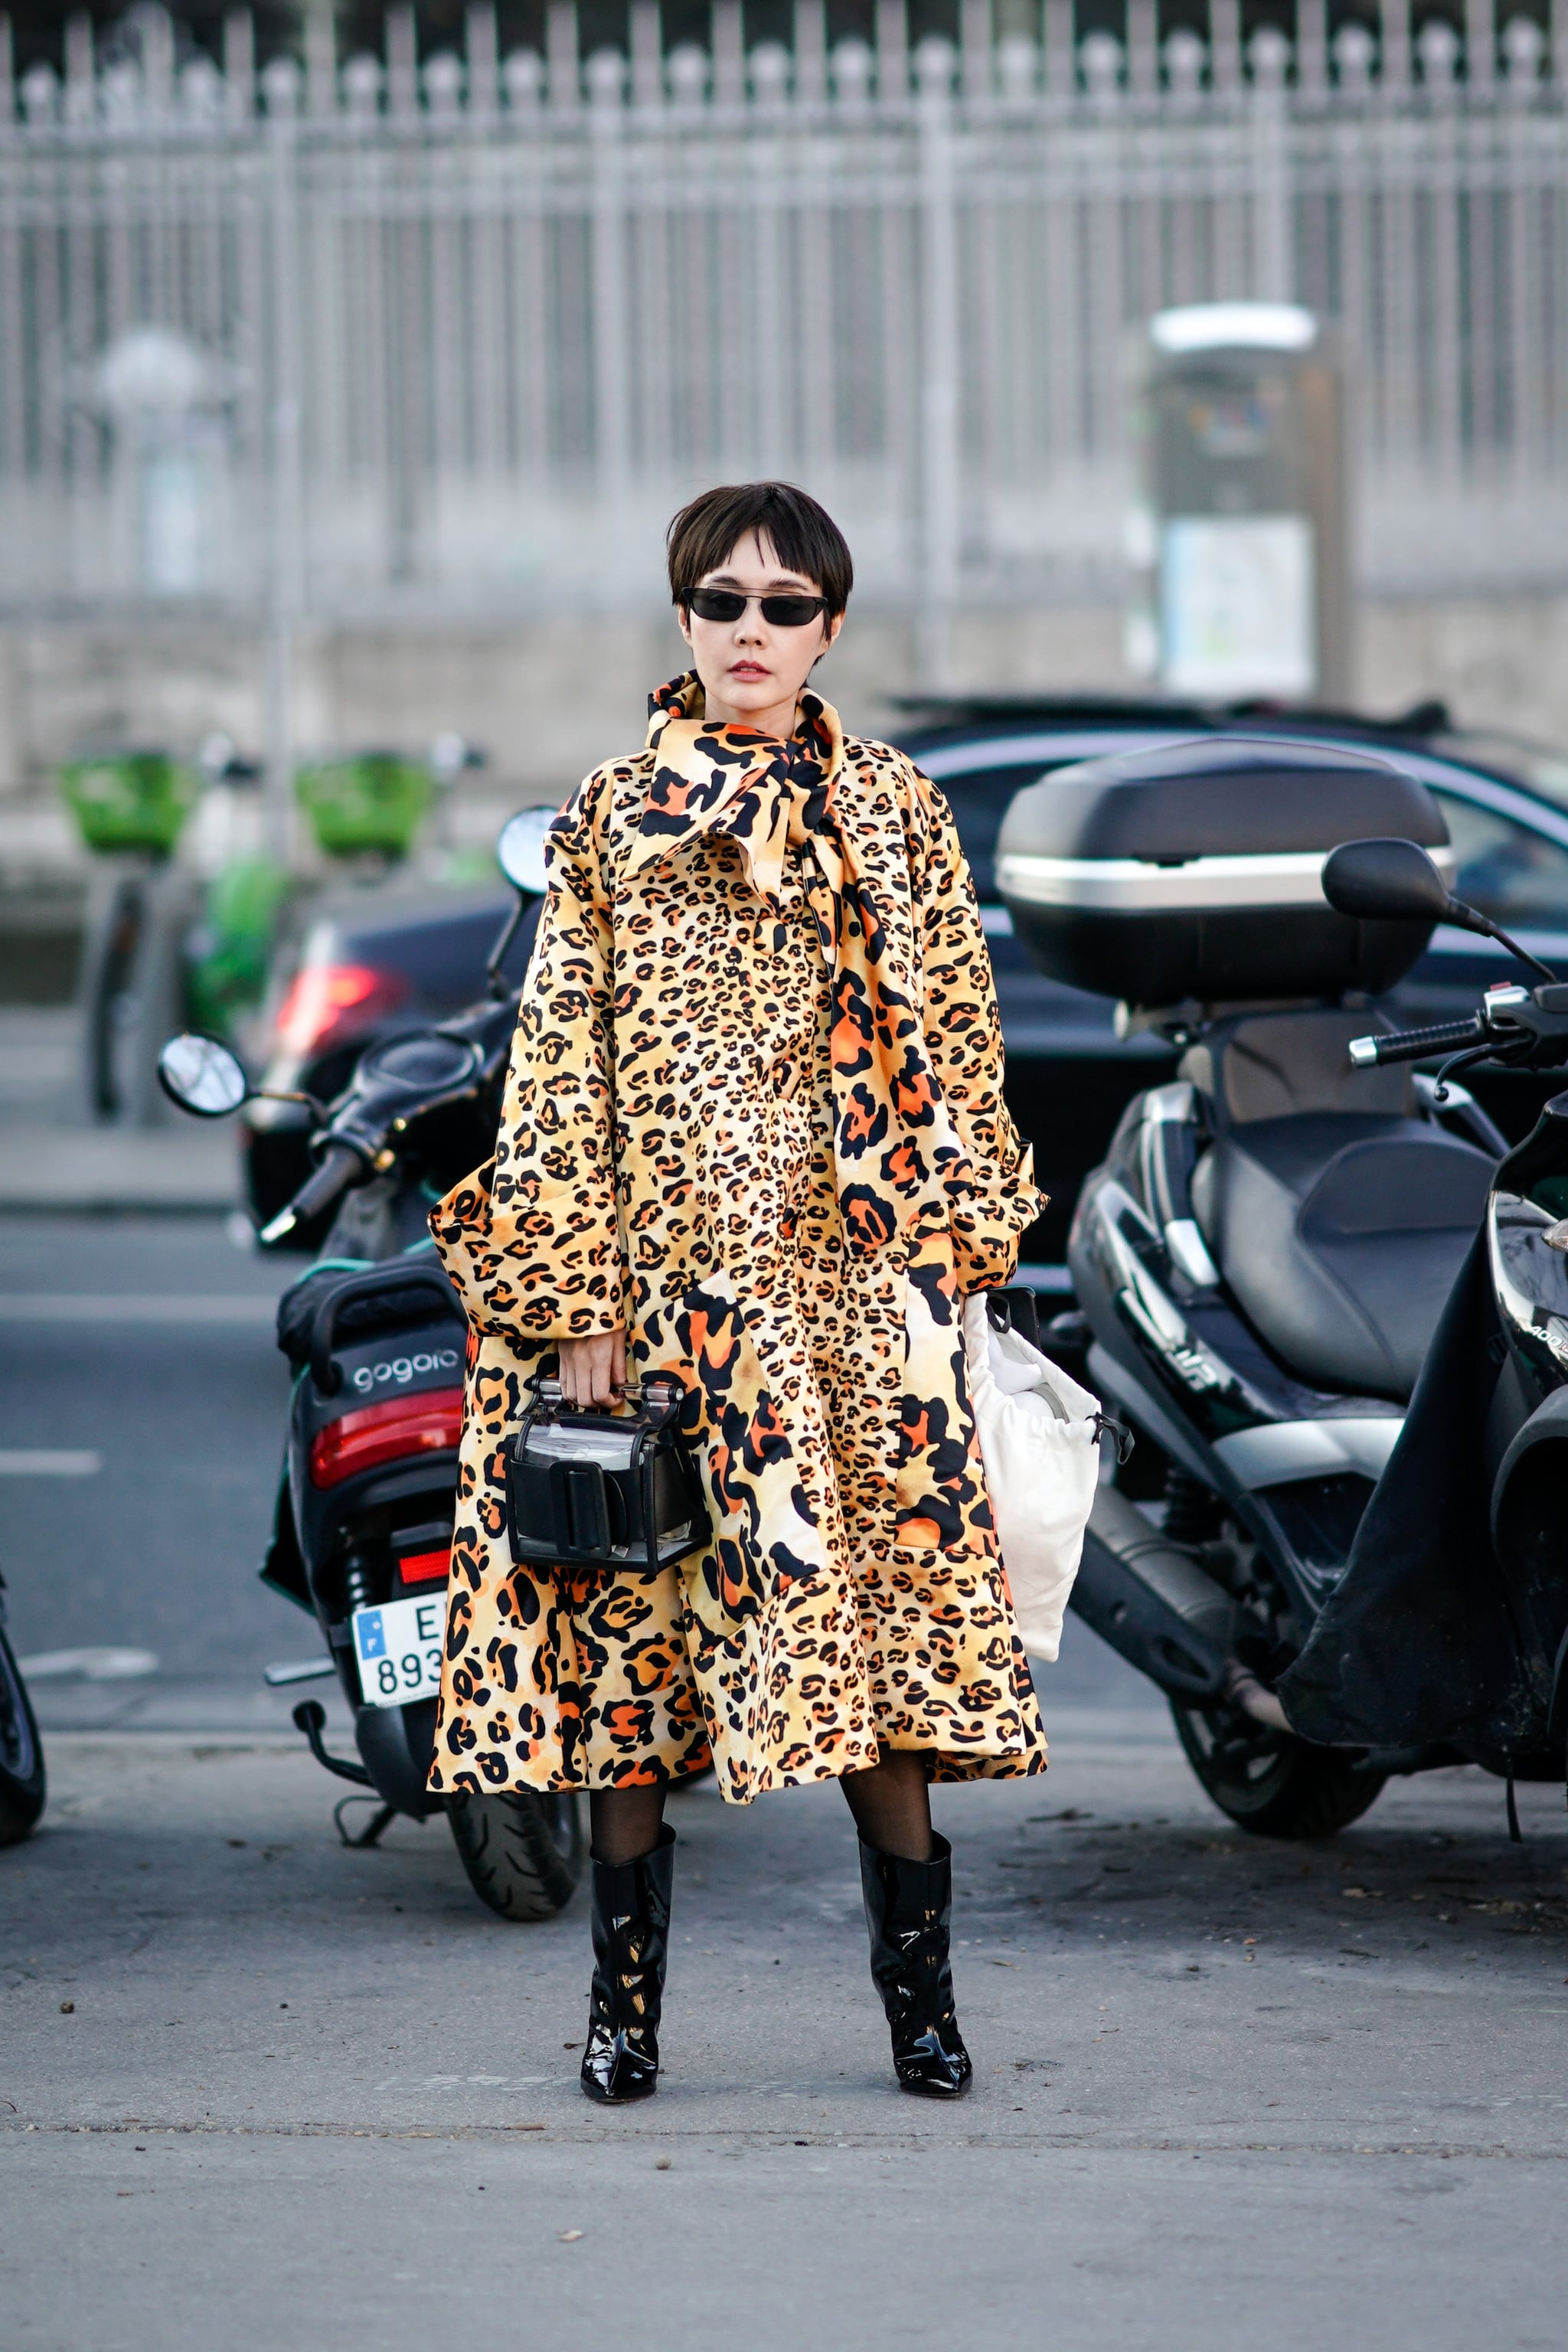 Style Your Leopard-Print Coat With: Sheer Tights, Black Boots, and